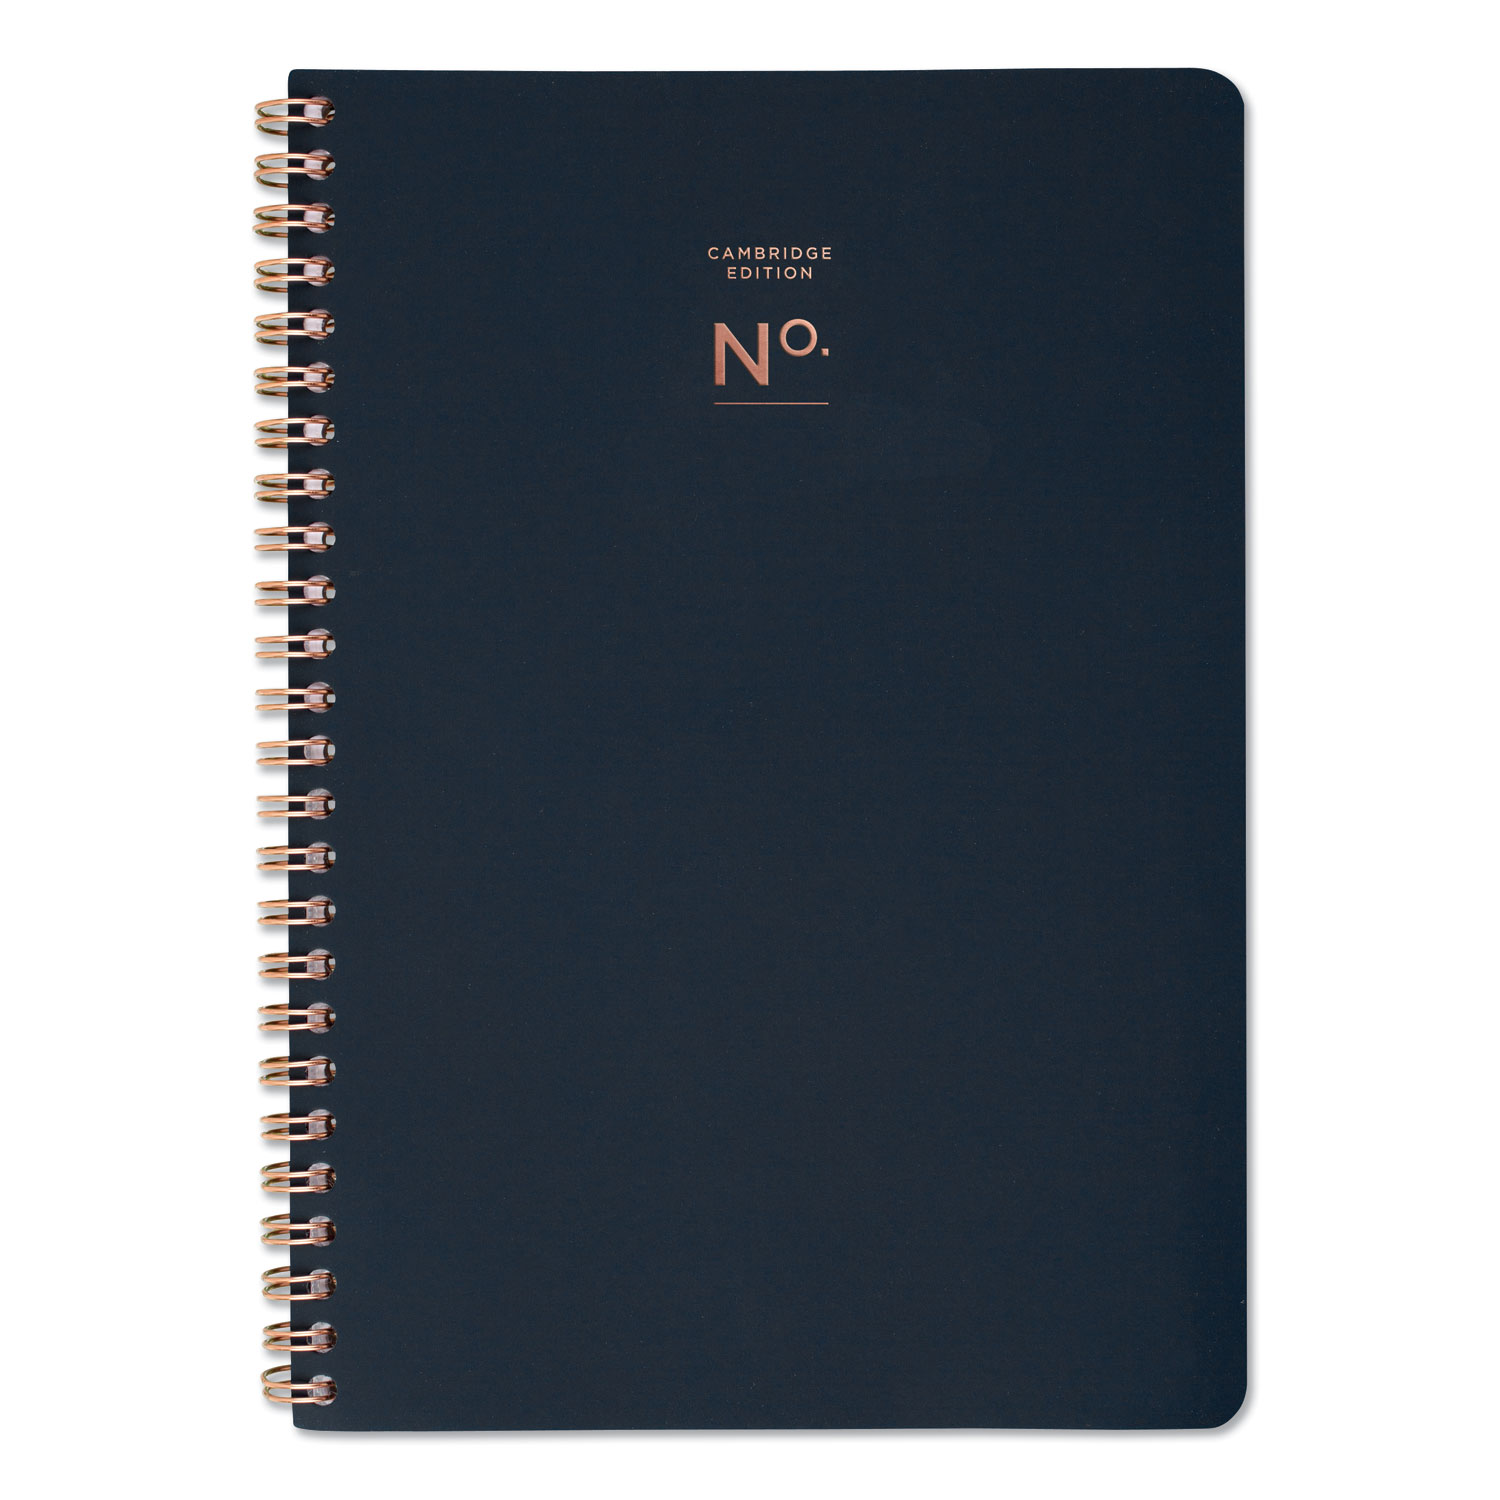  Cambridge 528090558 Workstyle Soft Cover Weekly/Monthly Planner, 11 x 8 1/2, Navy Cover, 2020 (AAG528090558) 